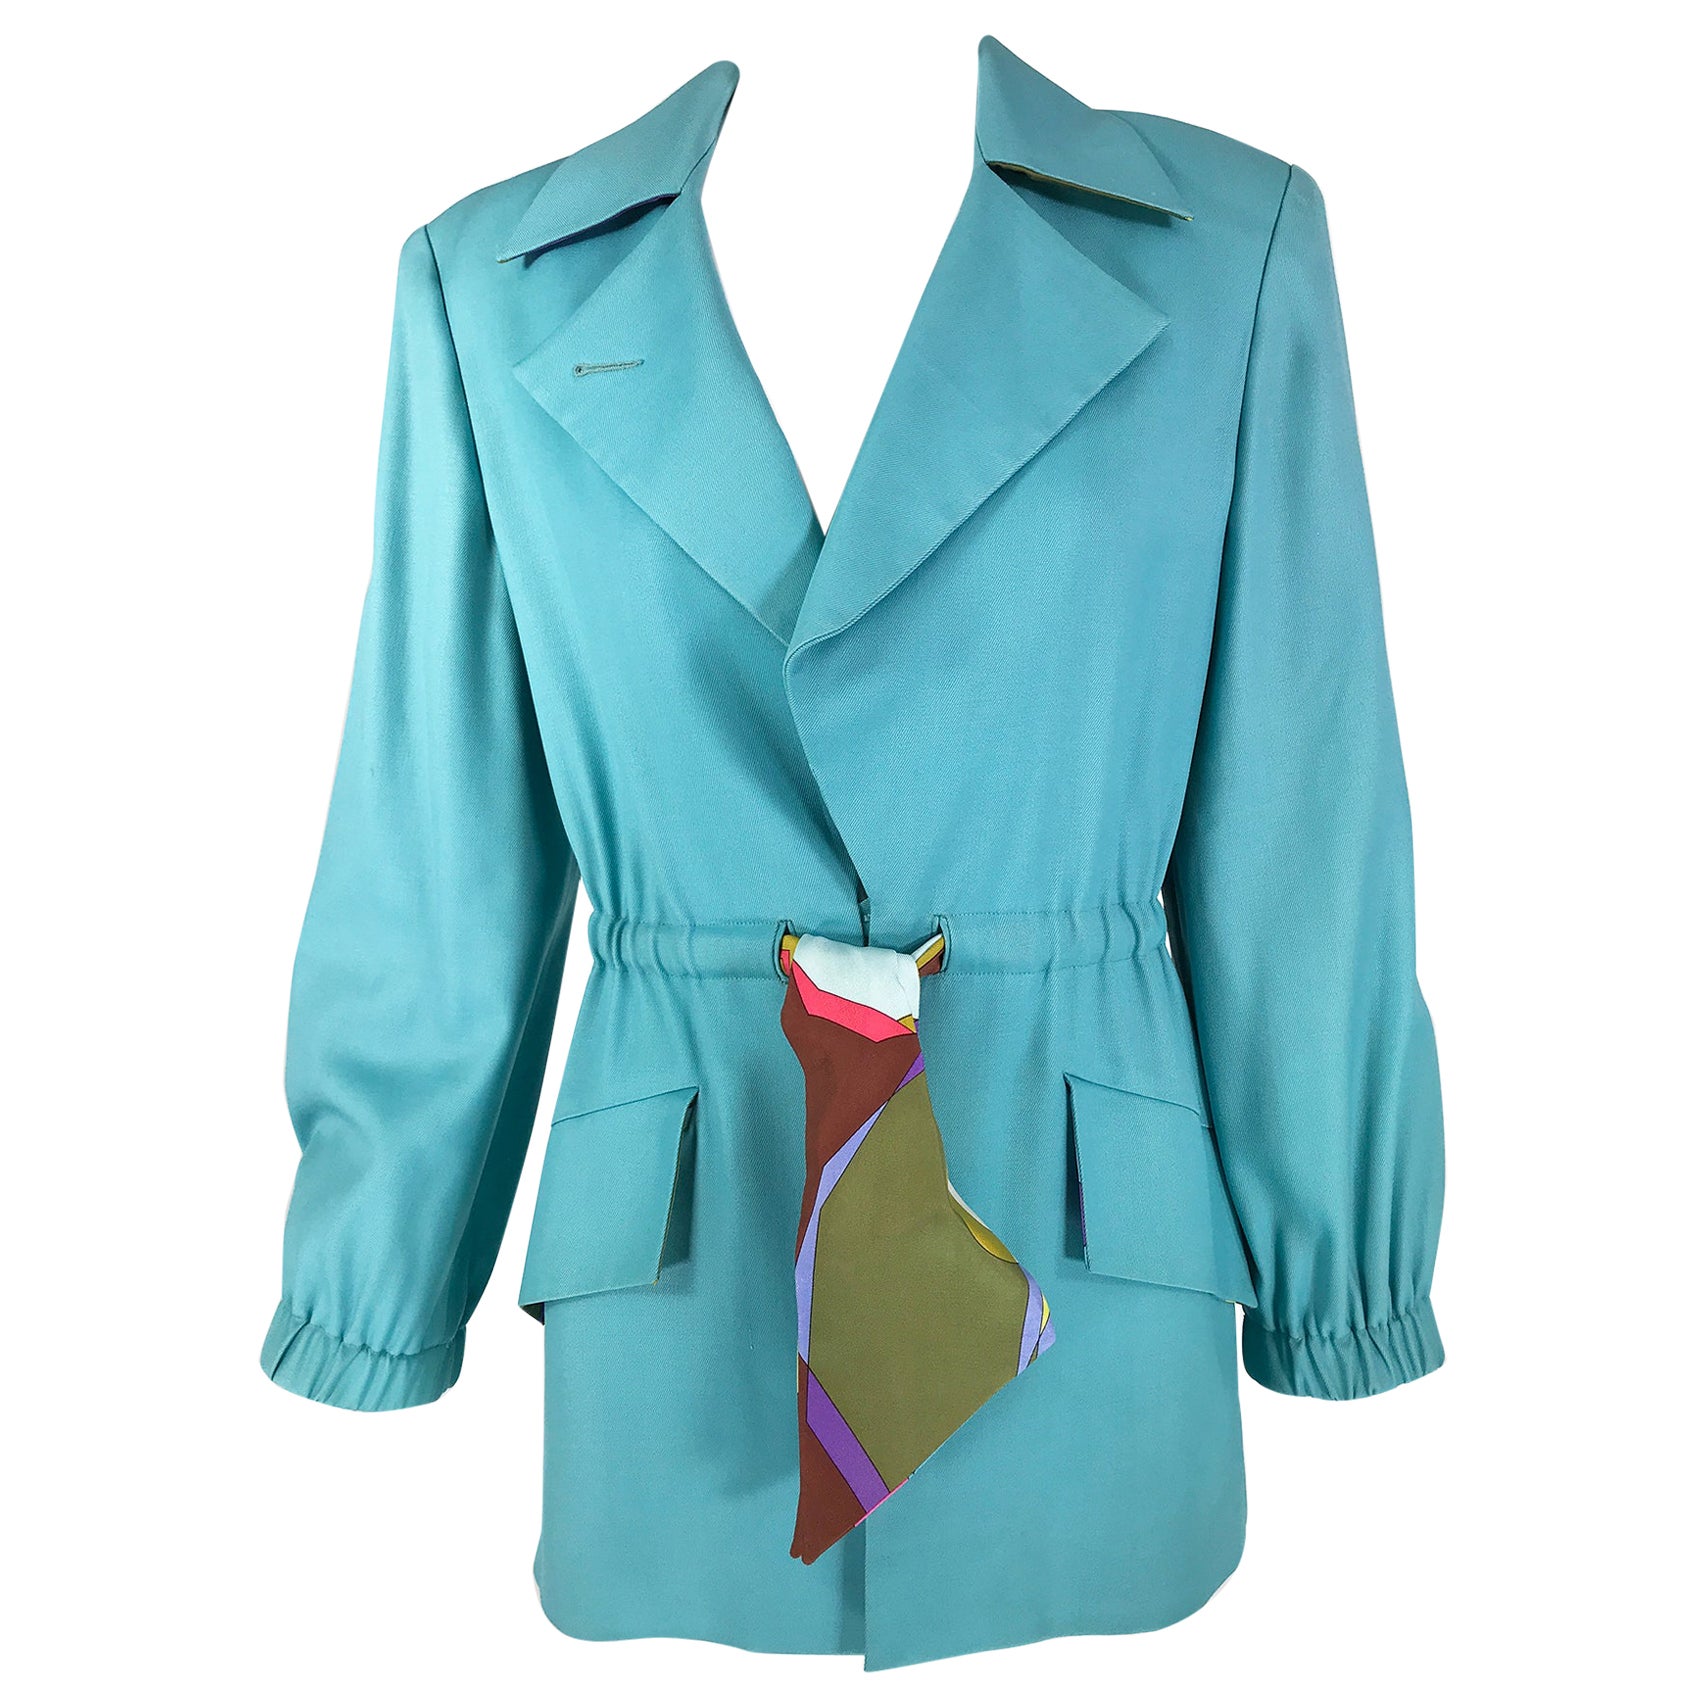 Rare Pucci Blue Wool Twill Jacket with Silk Pucci Fabric Lining 1970s